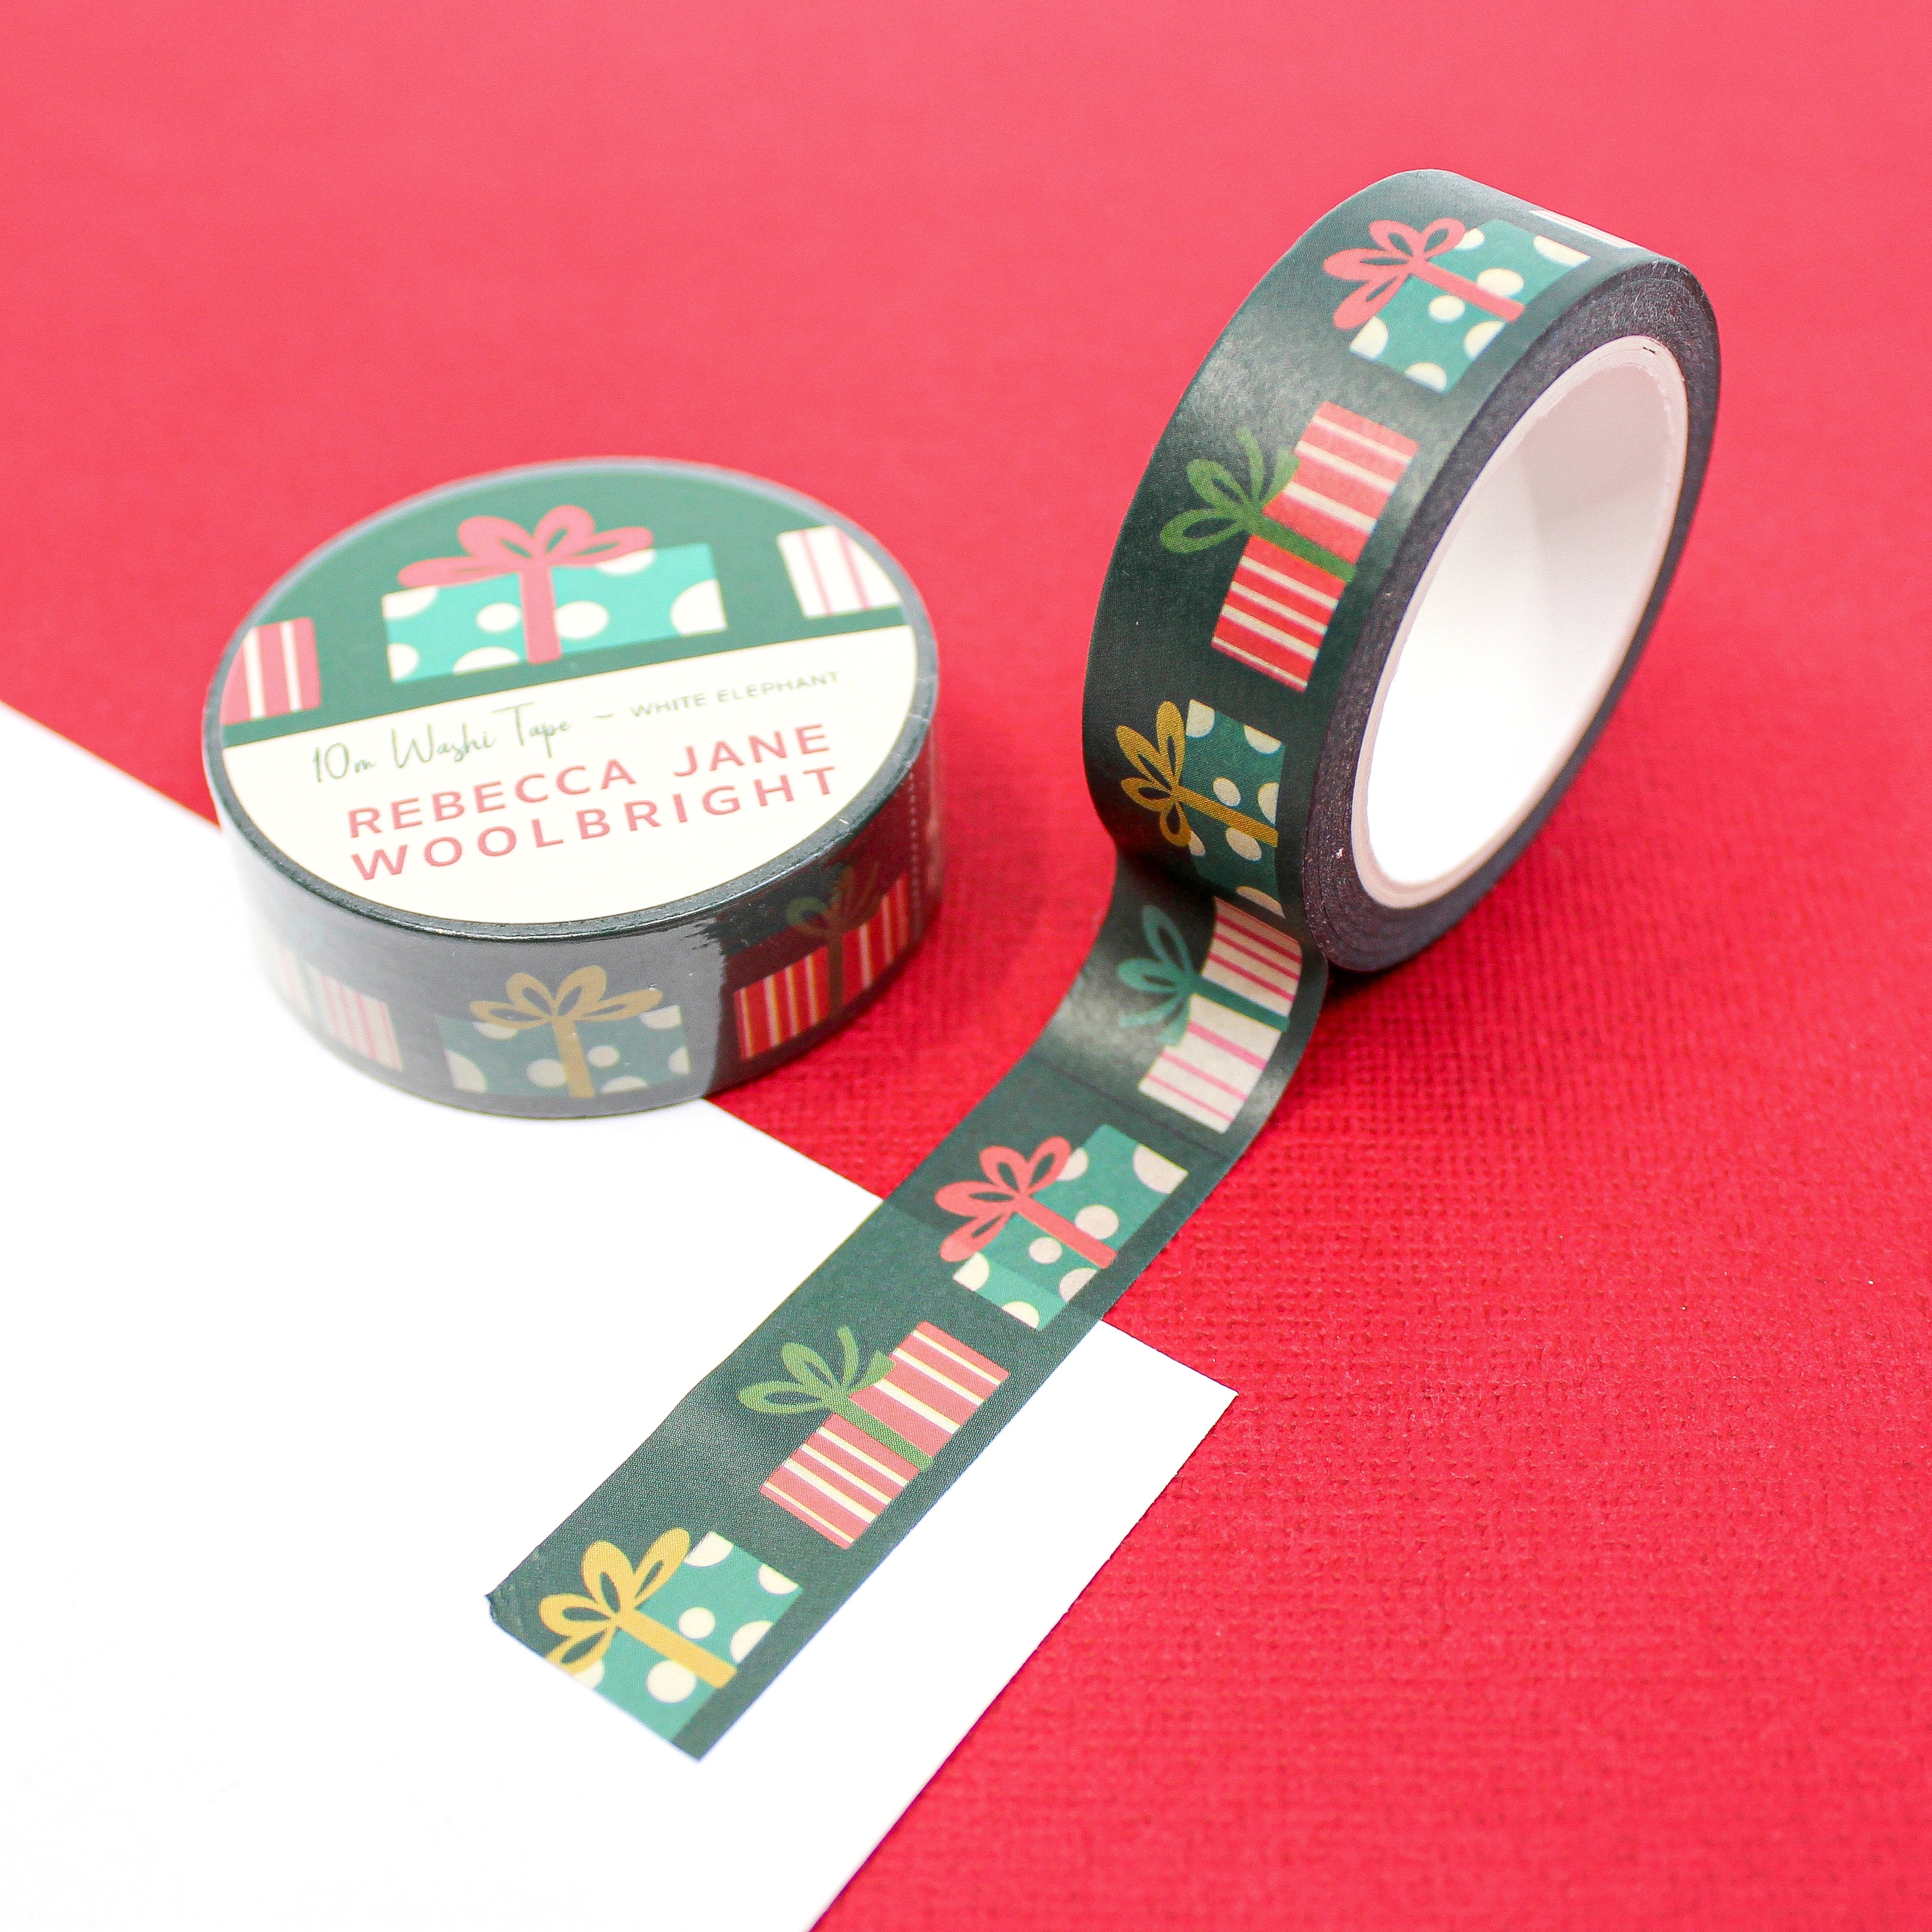 This is a colorful collections of gifts view themed washi tape from BBB Supplies Craft Shop